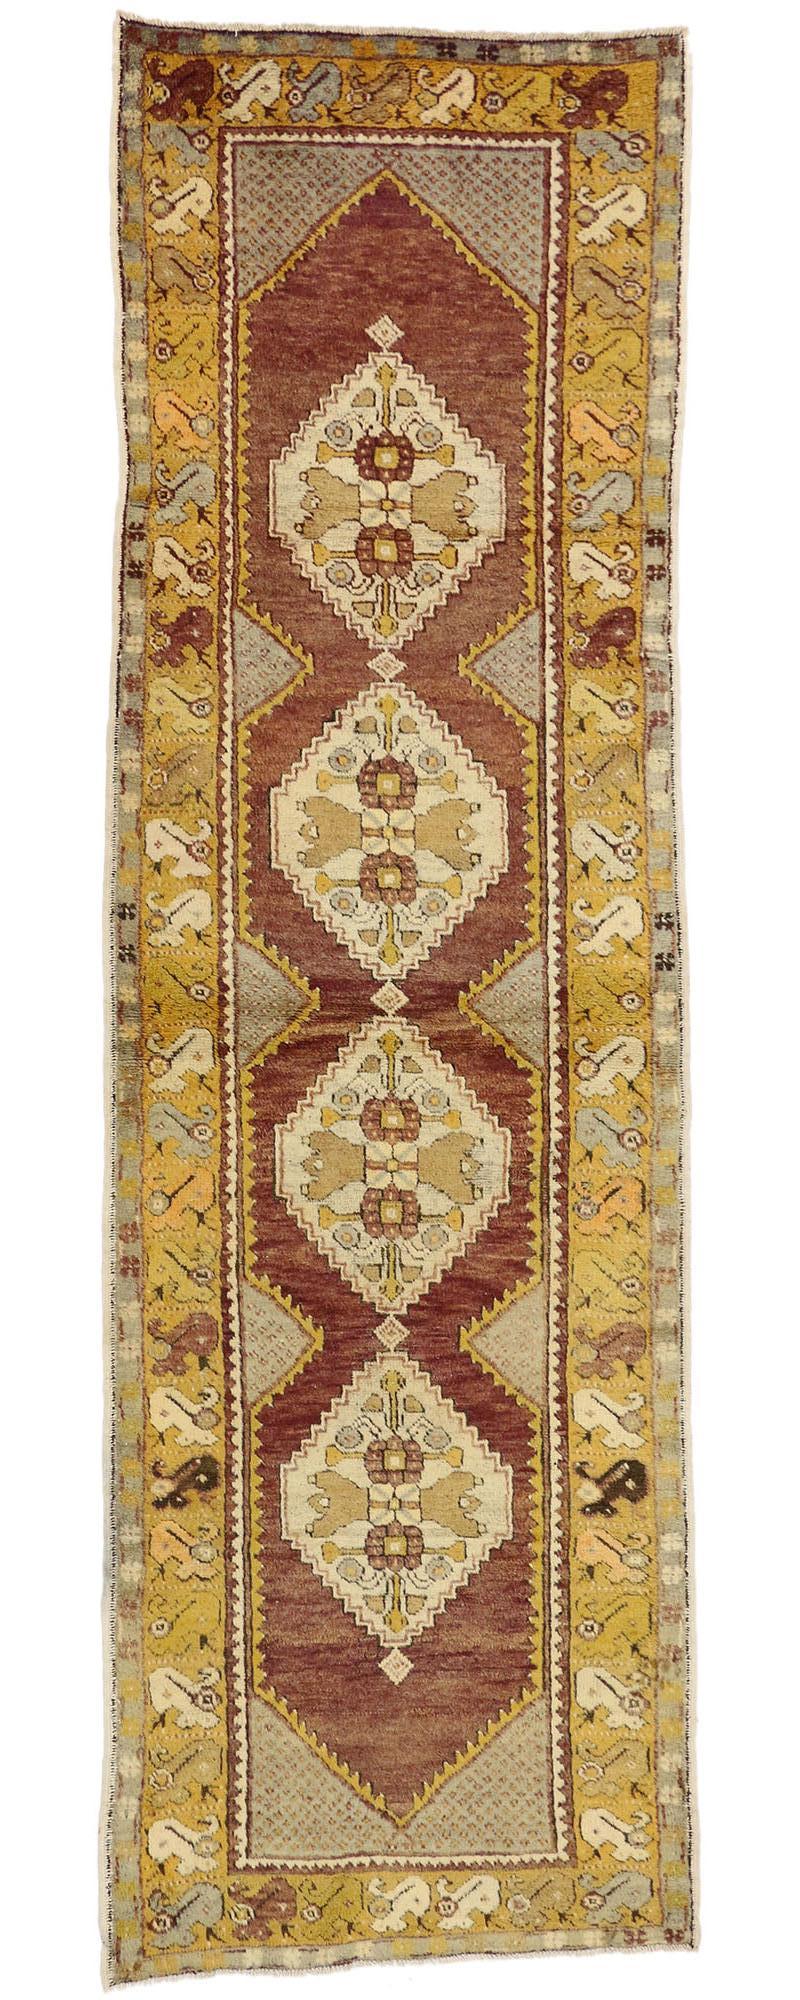 50929 Vintage Turkish Oushak Runner with Traditional Style 03'00 x 09'08. Warm and inviting, this hand-knotted wool vintage Turkish Oushak runner will create a casual elegant setting with its traditional style. The abrashed field features four